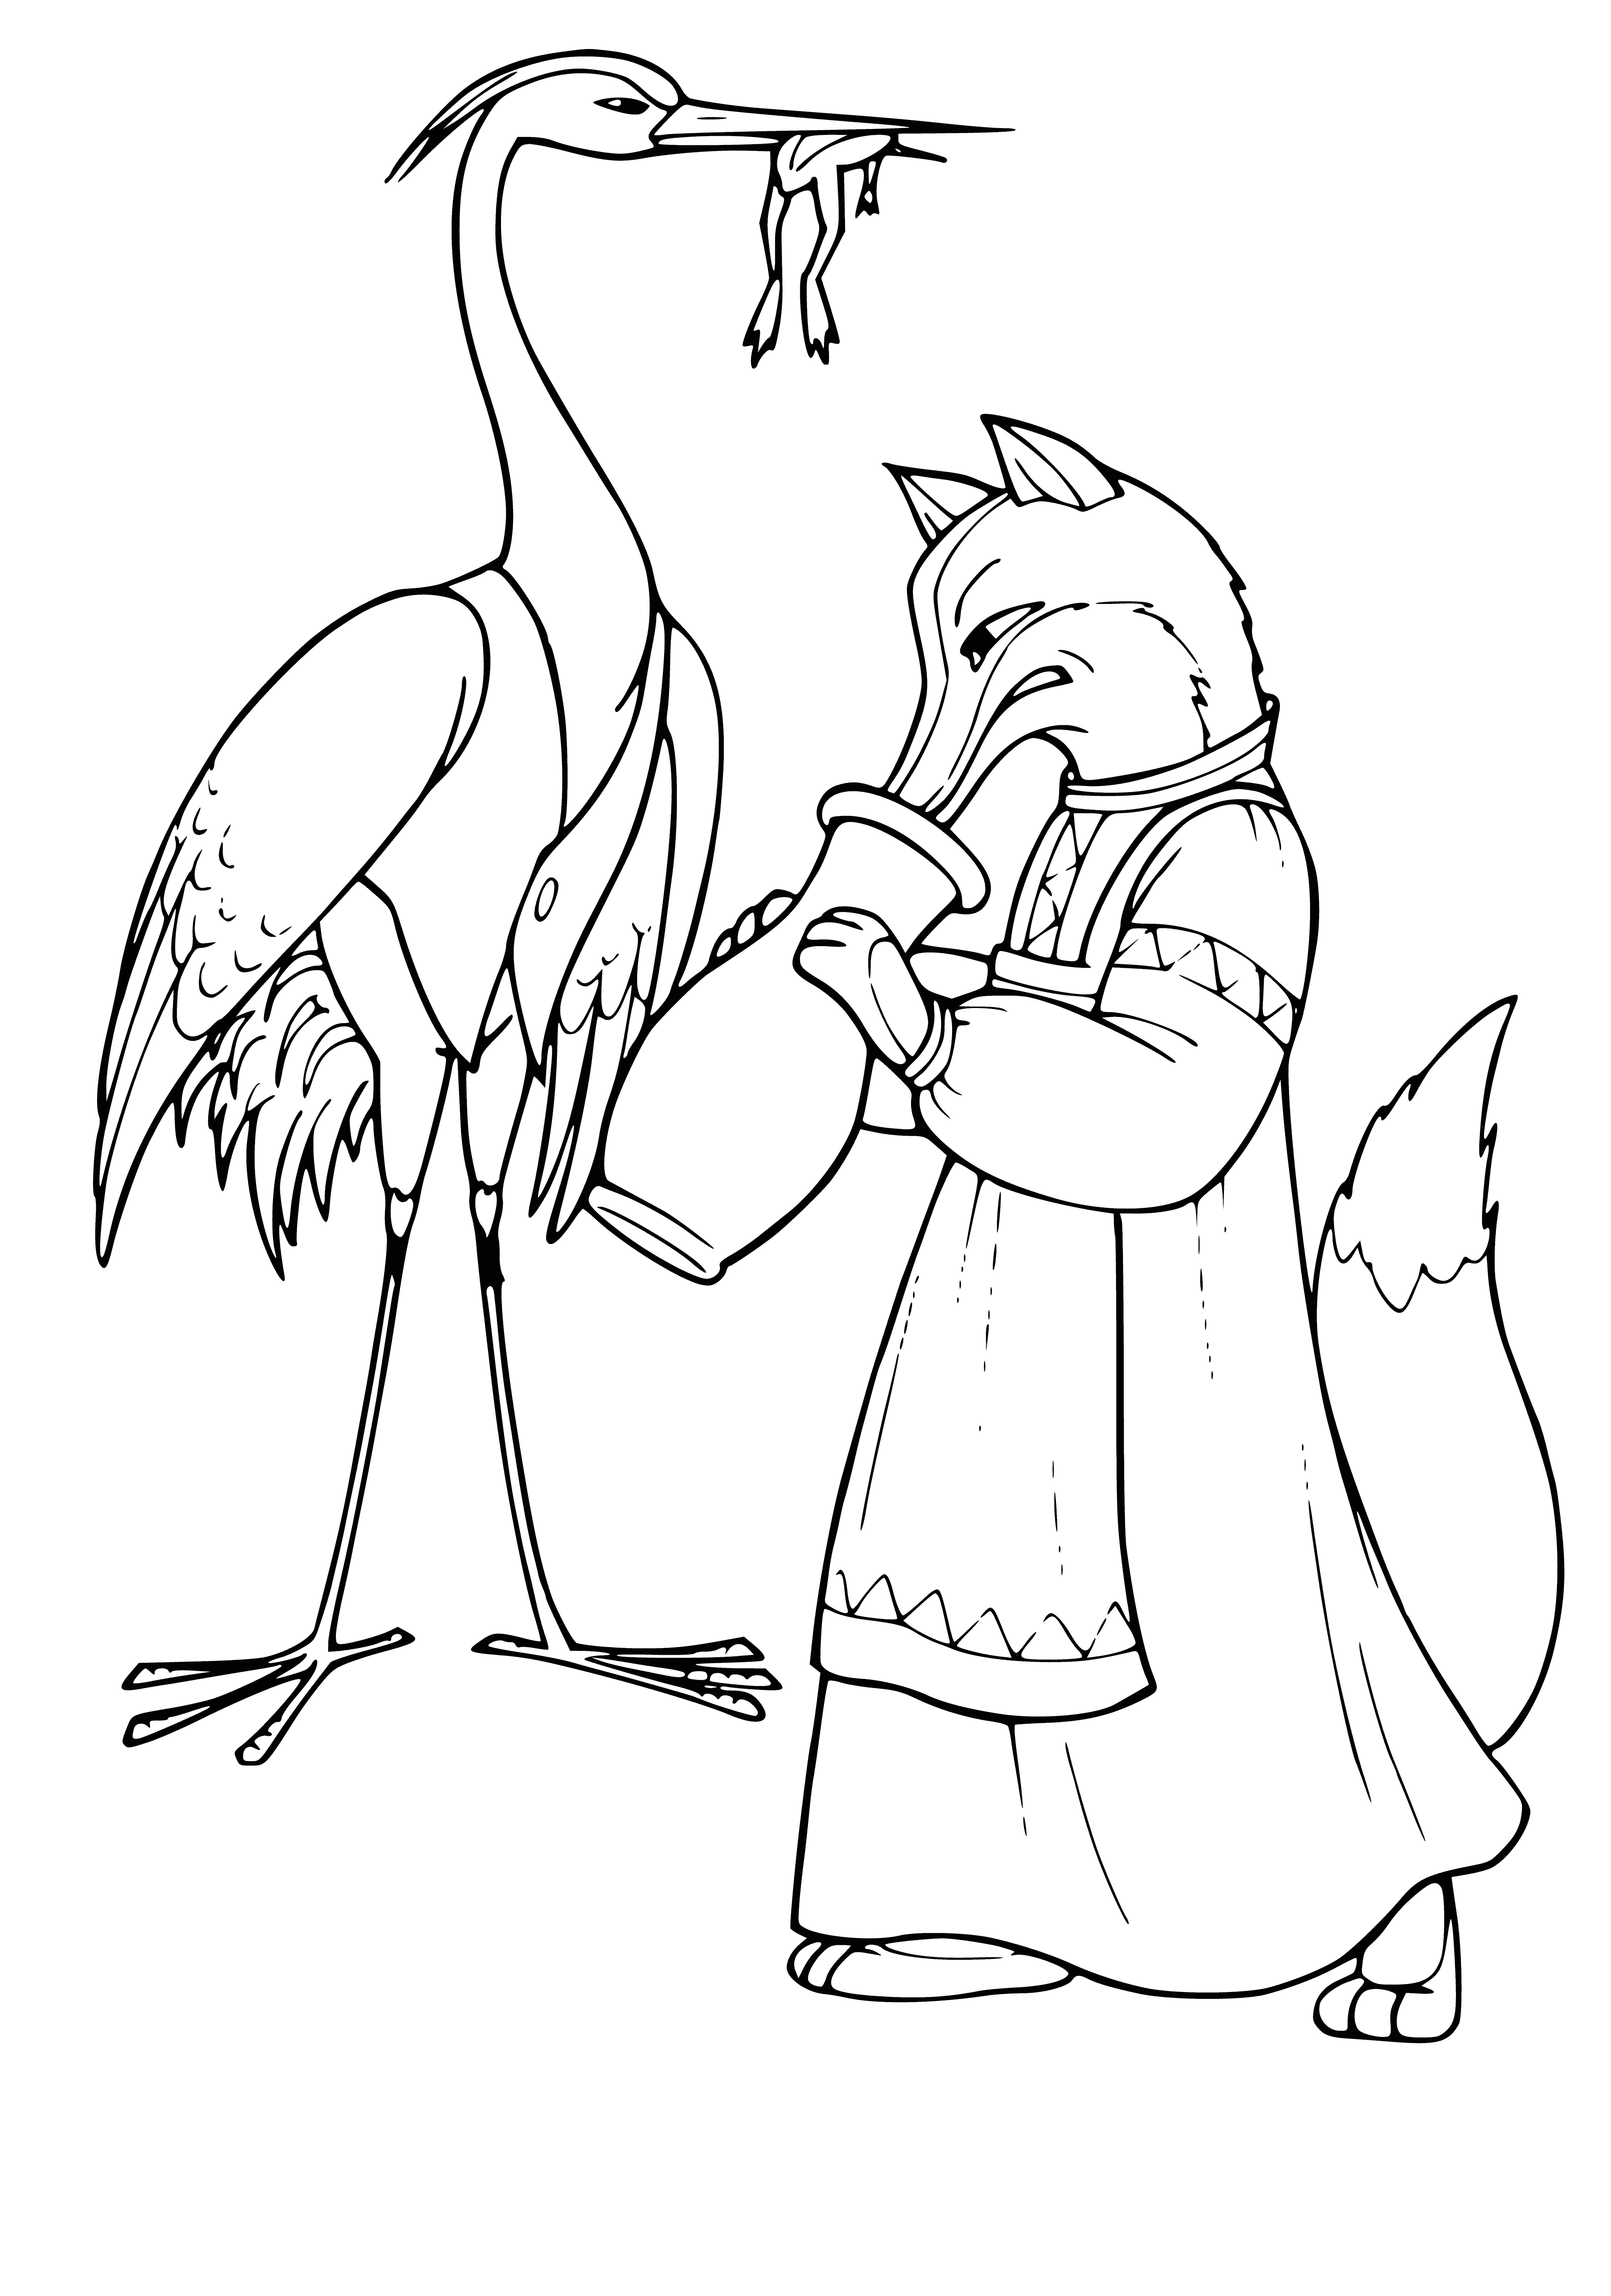 coloring page: Fox & crane by a stream: fox stands, crane drinks. Fox looks ready to pounce.